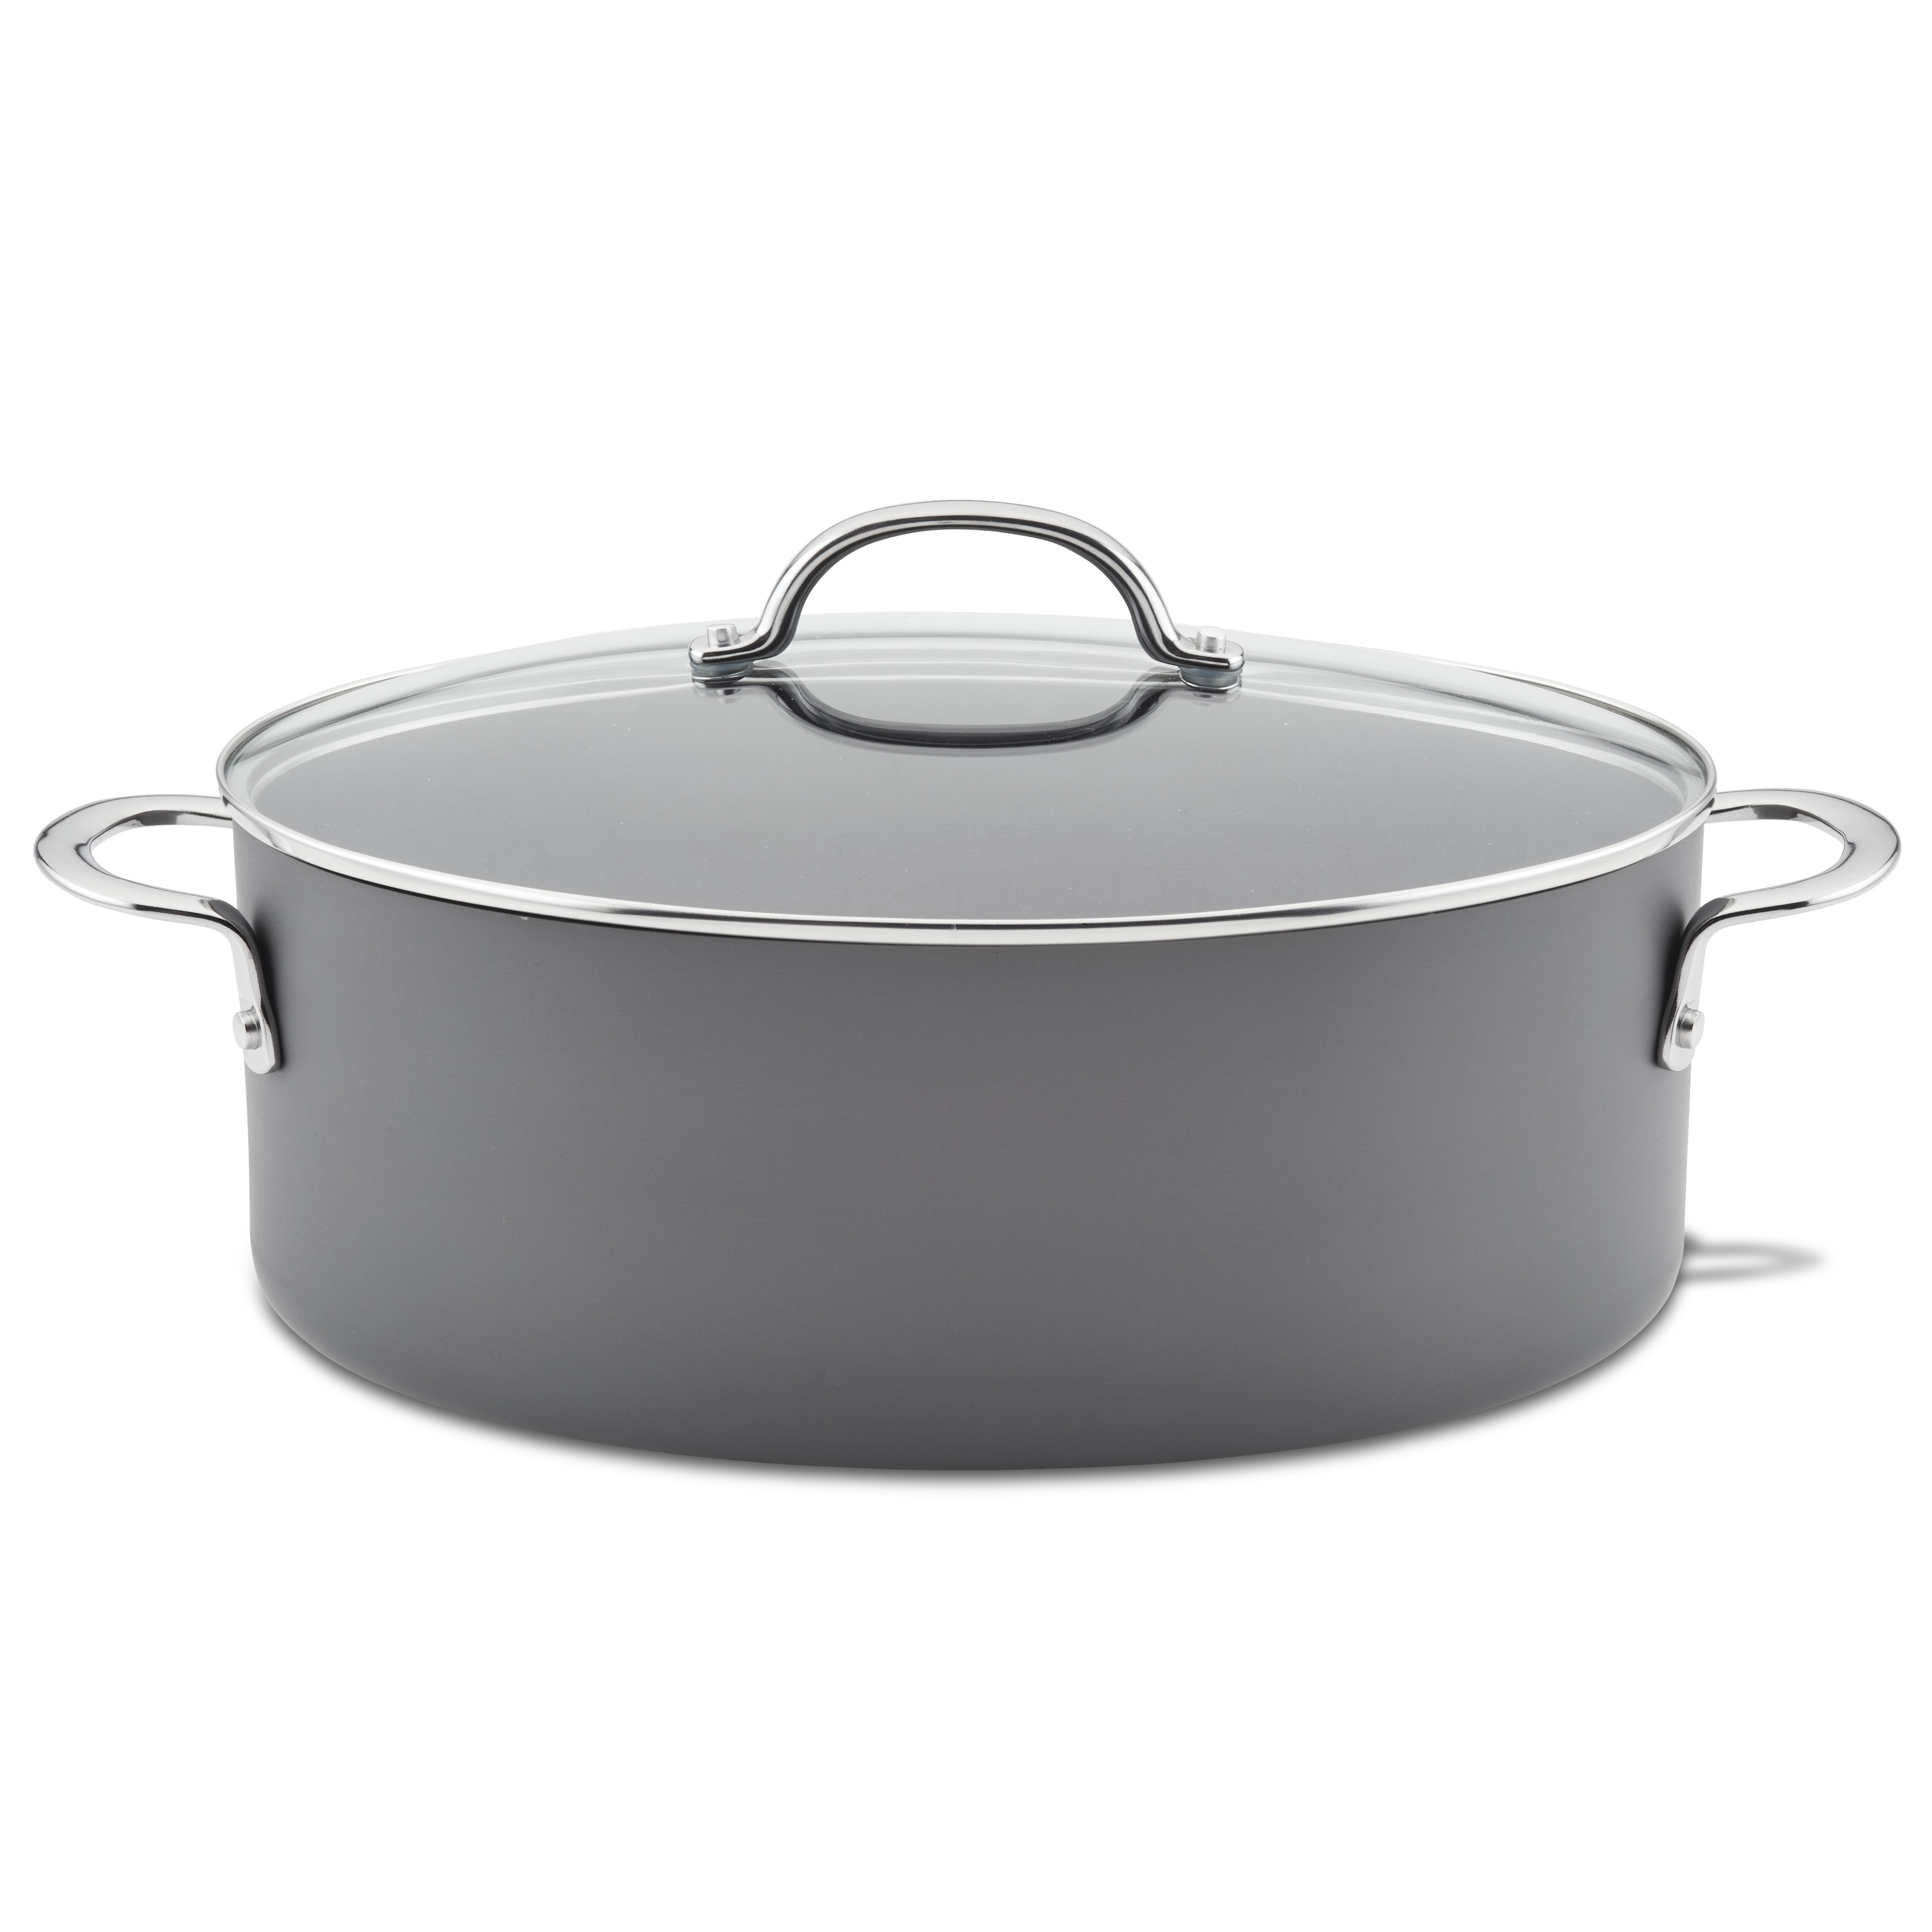 https://ak1.ostkcdn.com/images/products/is/images/direct/f213c6a4b1336c584fd85b88b5225e9703e0d145/Rachael-Ray-Hard-Anodized-Nonstick-Cookware-Oval-Pasta-Stockpot-and-Braiser%2C-8-Quart%2C-Gray.jpg